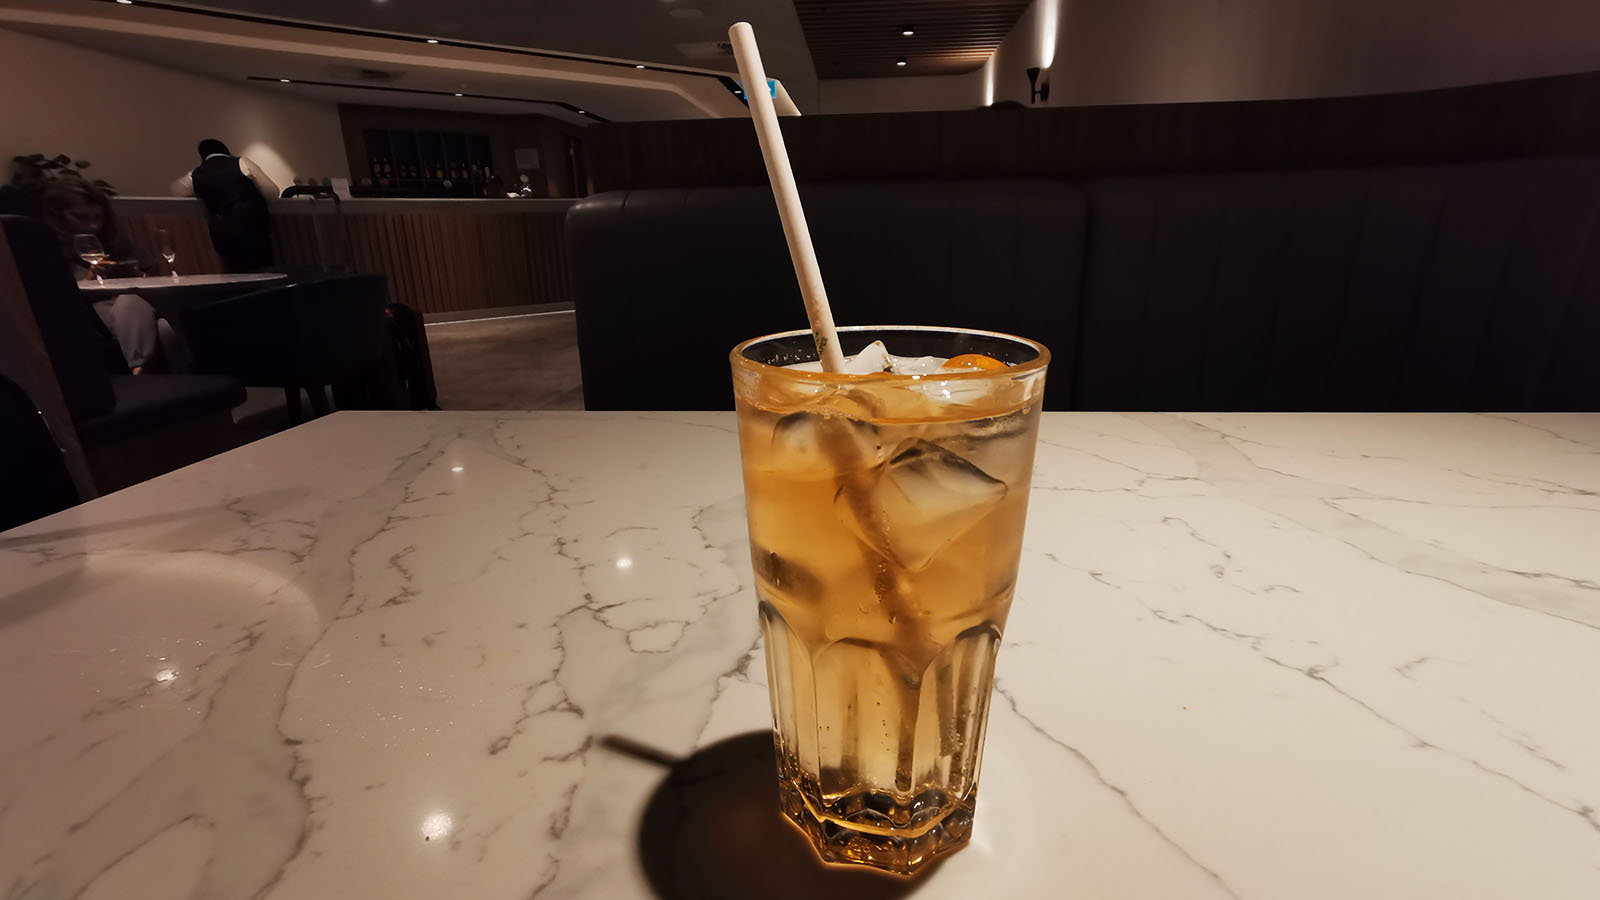 Lemon, lime and bitters in the American Express Centurion Lounge at Sydney Airport